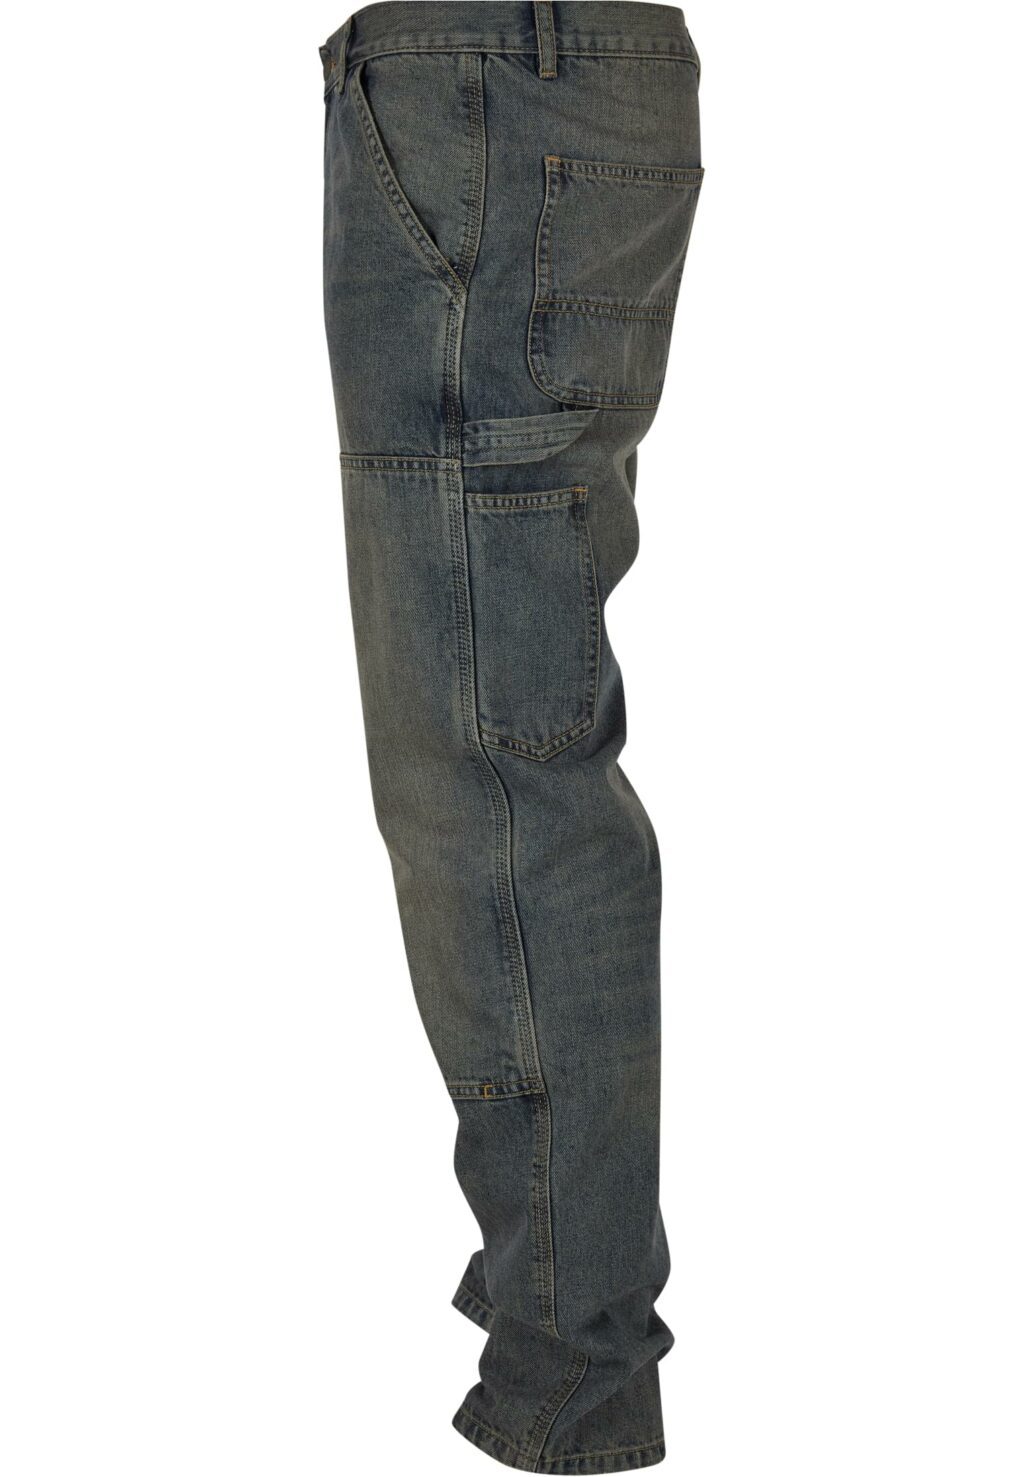 Urban Classics Double Knee Jeans 2000 washed TB5590